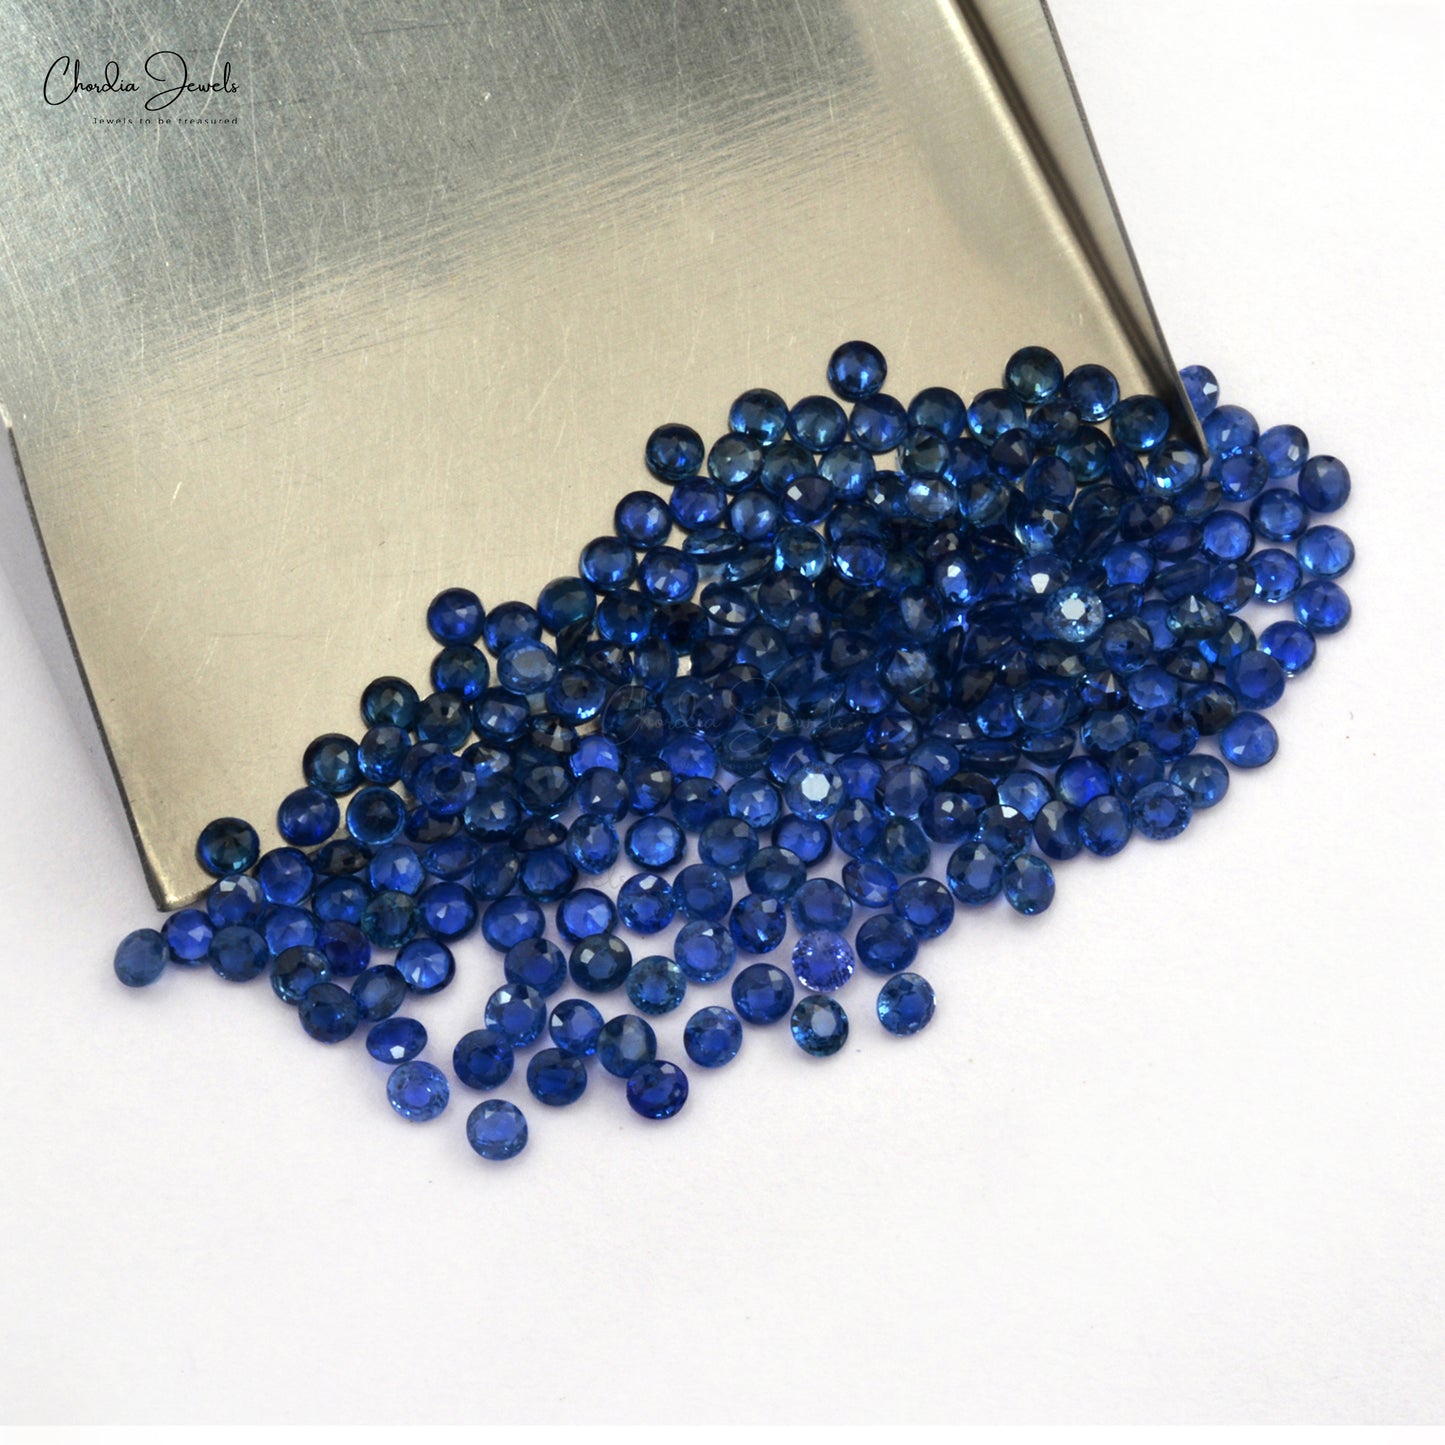 Load image into Gallery viewer, Blue Sapphire Gemstone
